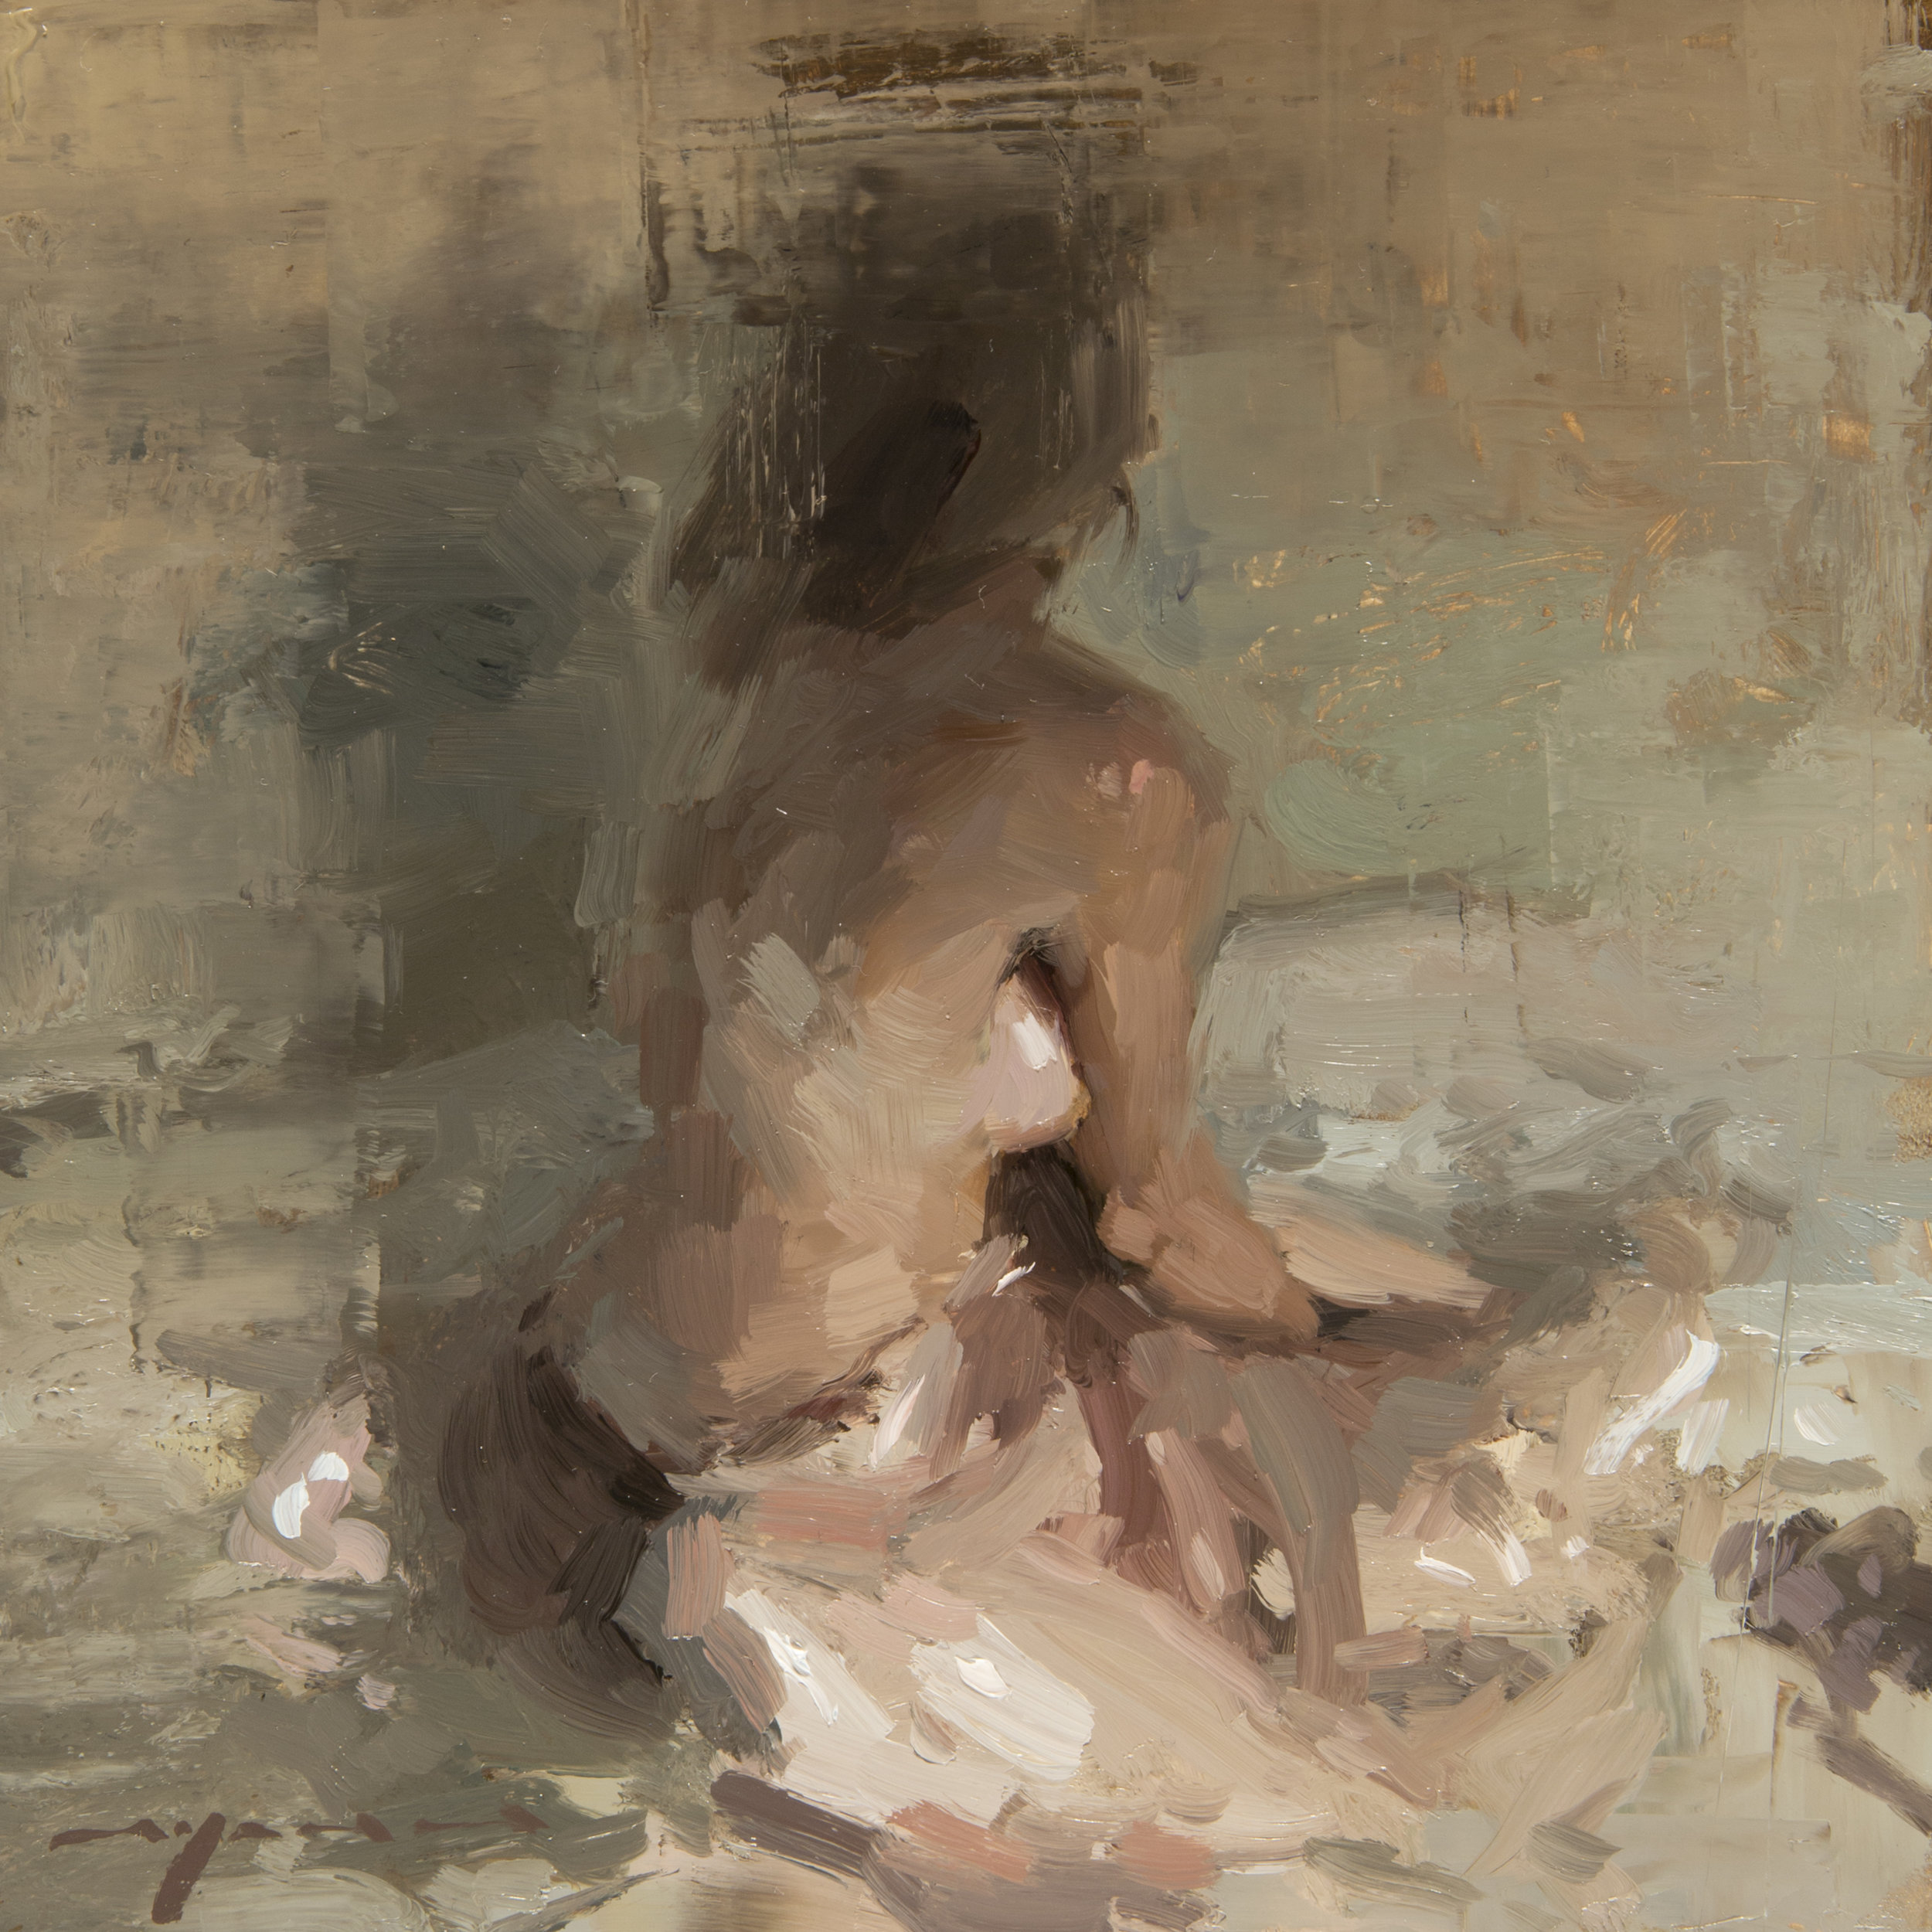 Figure - Composed Form Study 5 - 6 x 6 inches - Oil on Panel - Jan-17 